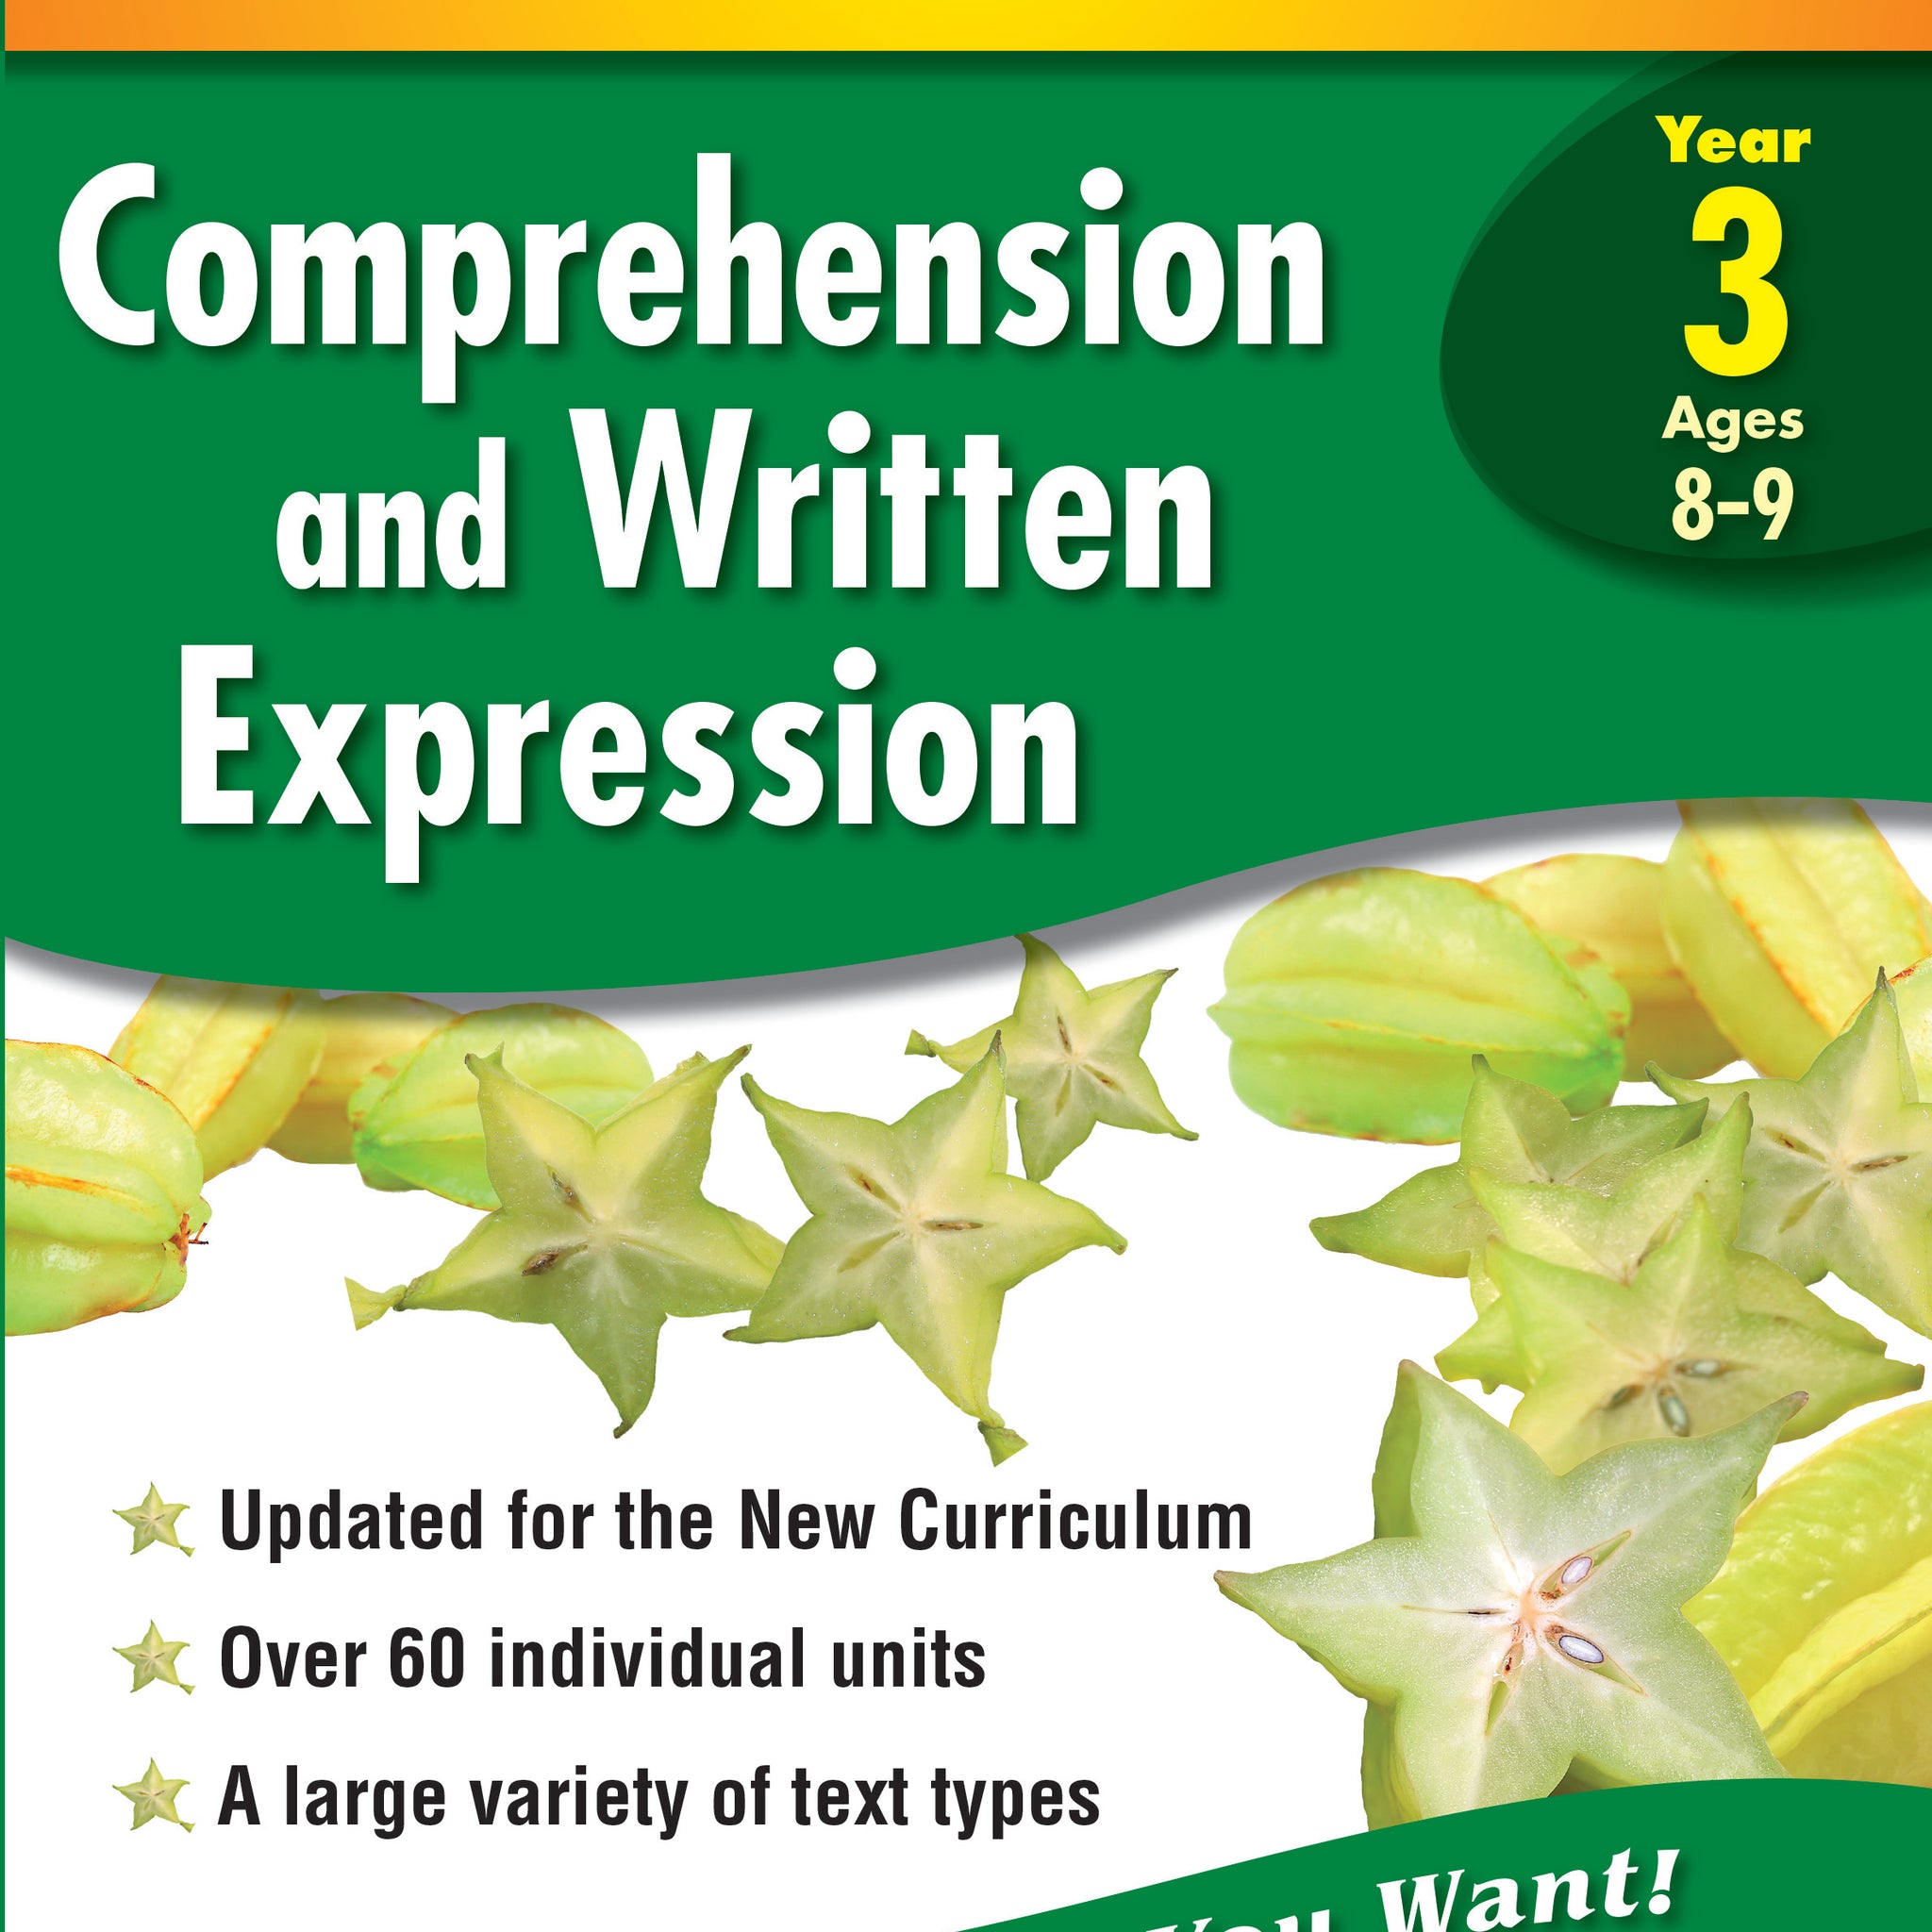 Excel Basic Skills Workbook: Comprehension and Written Expression Year 3